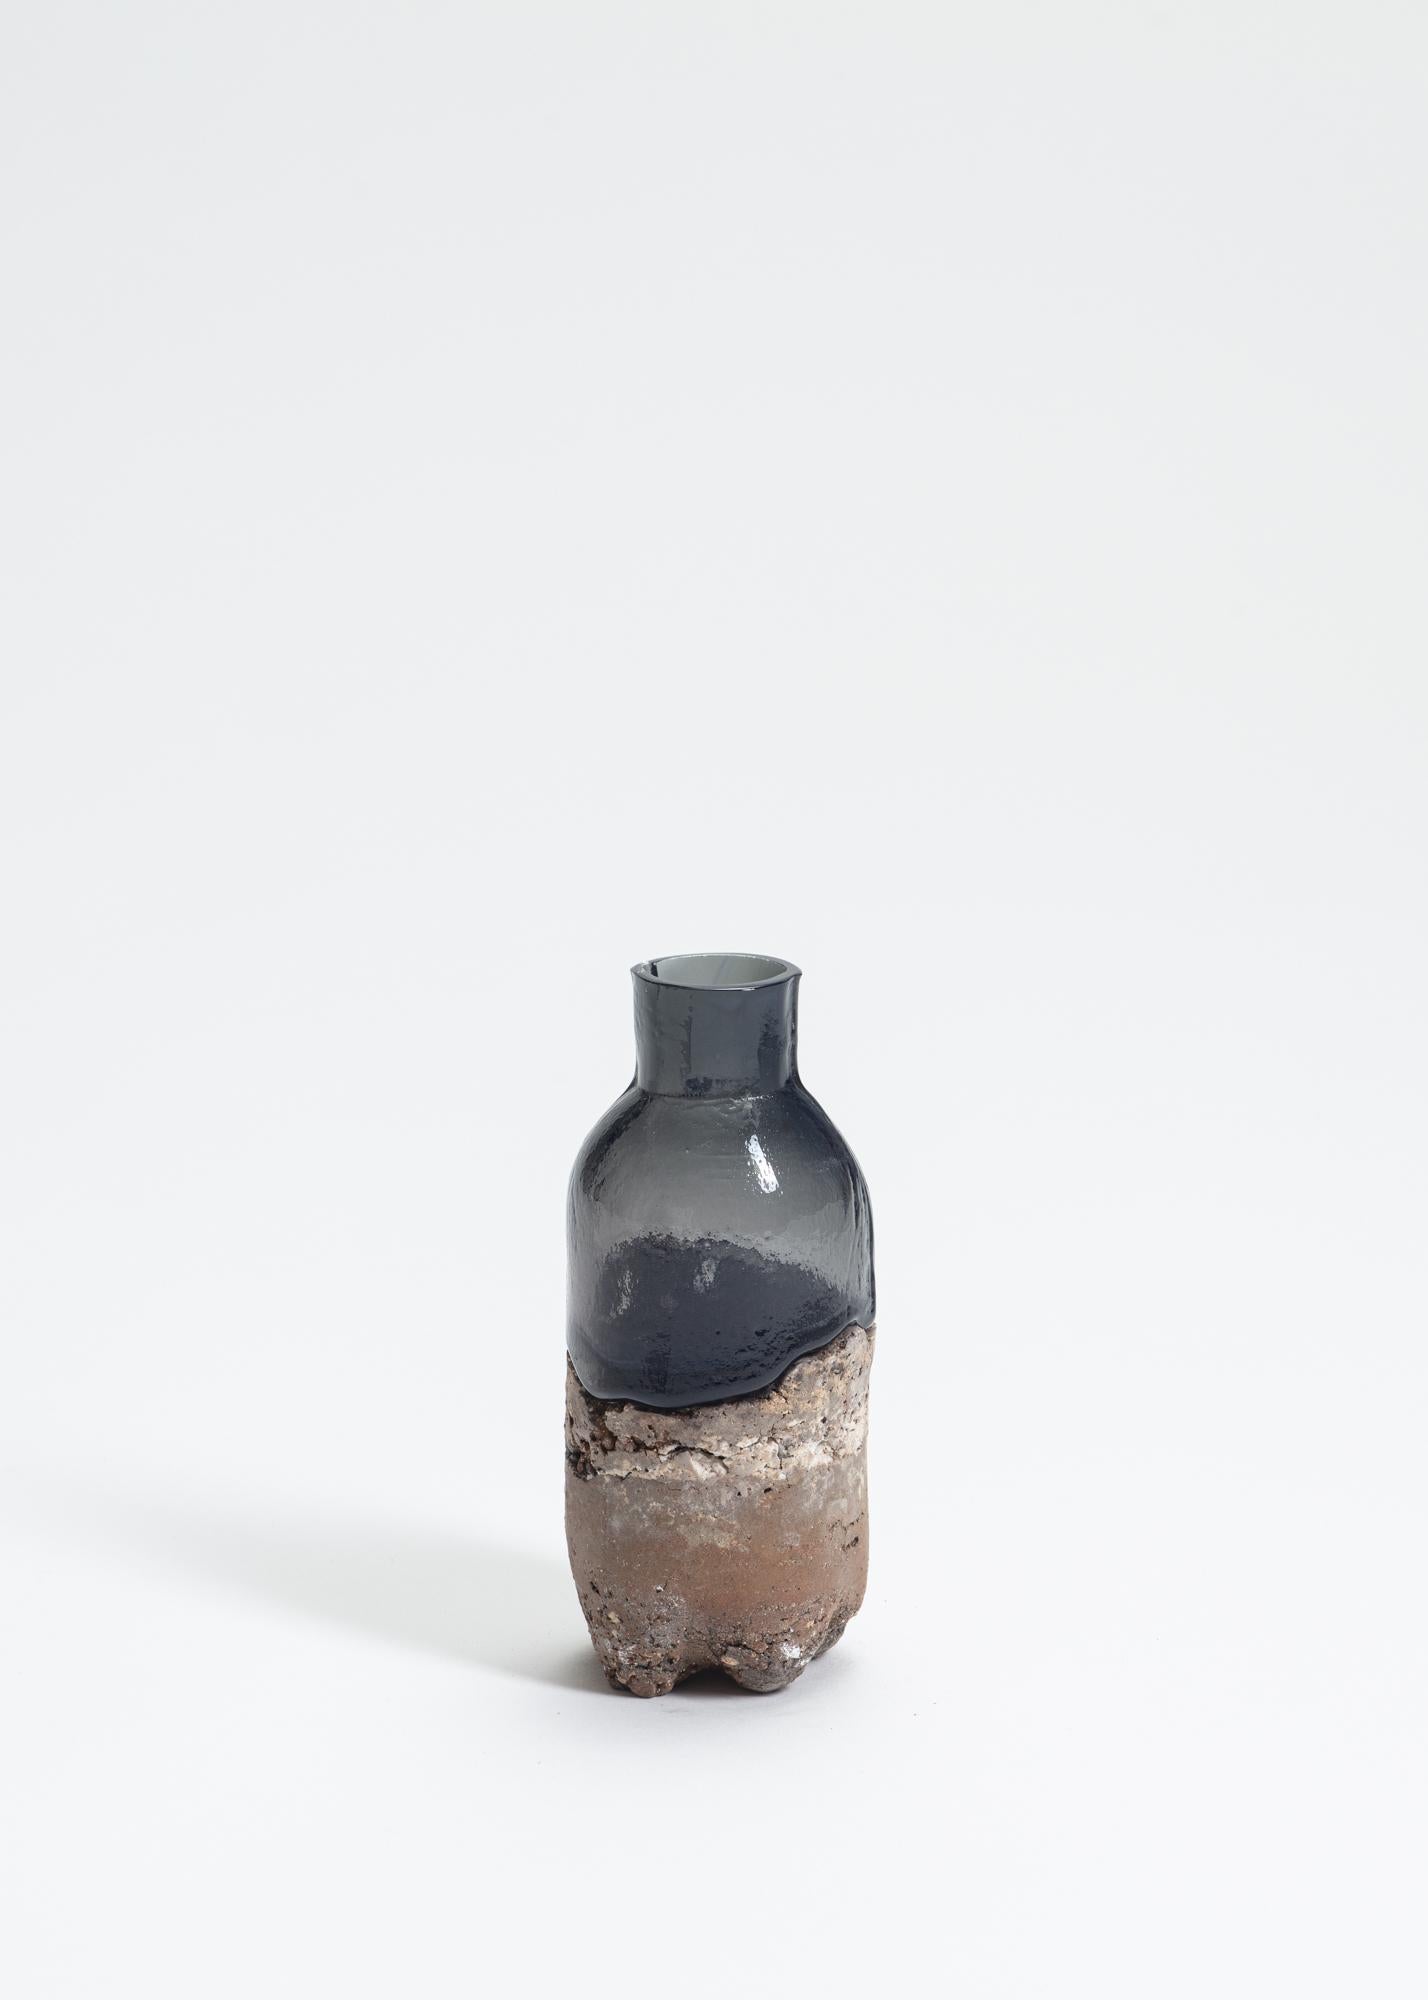 FUWA FUWA, No. 11 Bottle by Yusuke´ Y. Offhause
One of a Kind, the work is in two parts (ceramic and glass).
Dimensions: D 6 x W 6 x H 14 cm.
Materials: stoneware, porcelain, glass.

Yusuke´ Y. Offhause:
